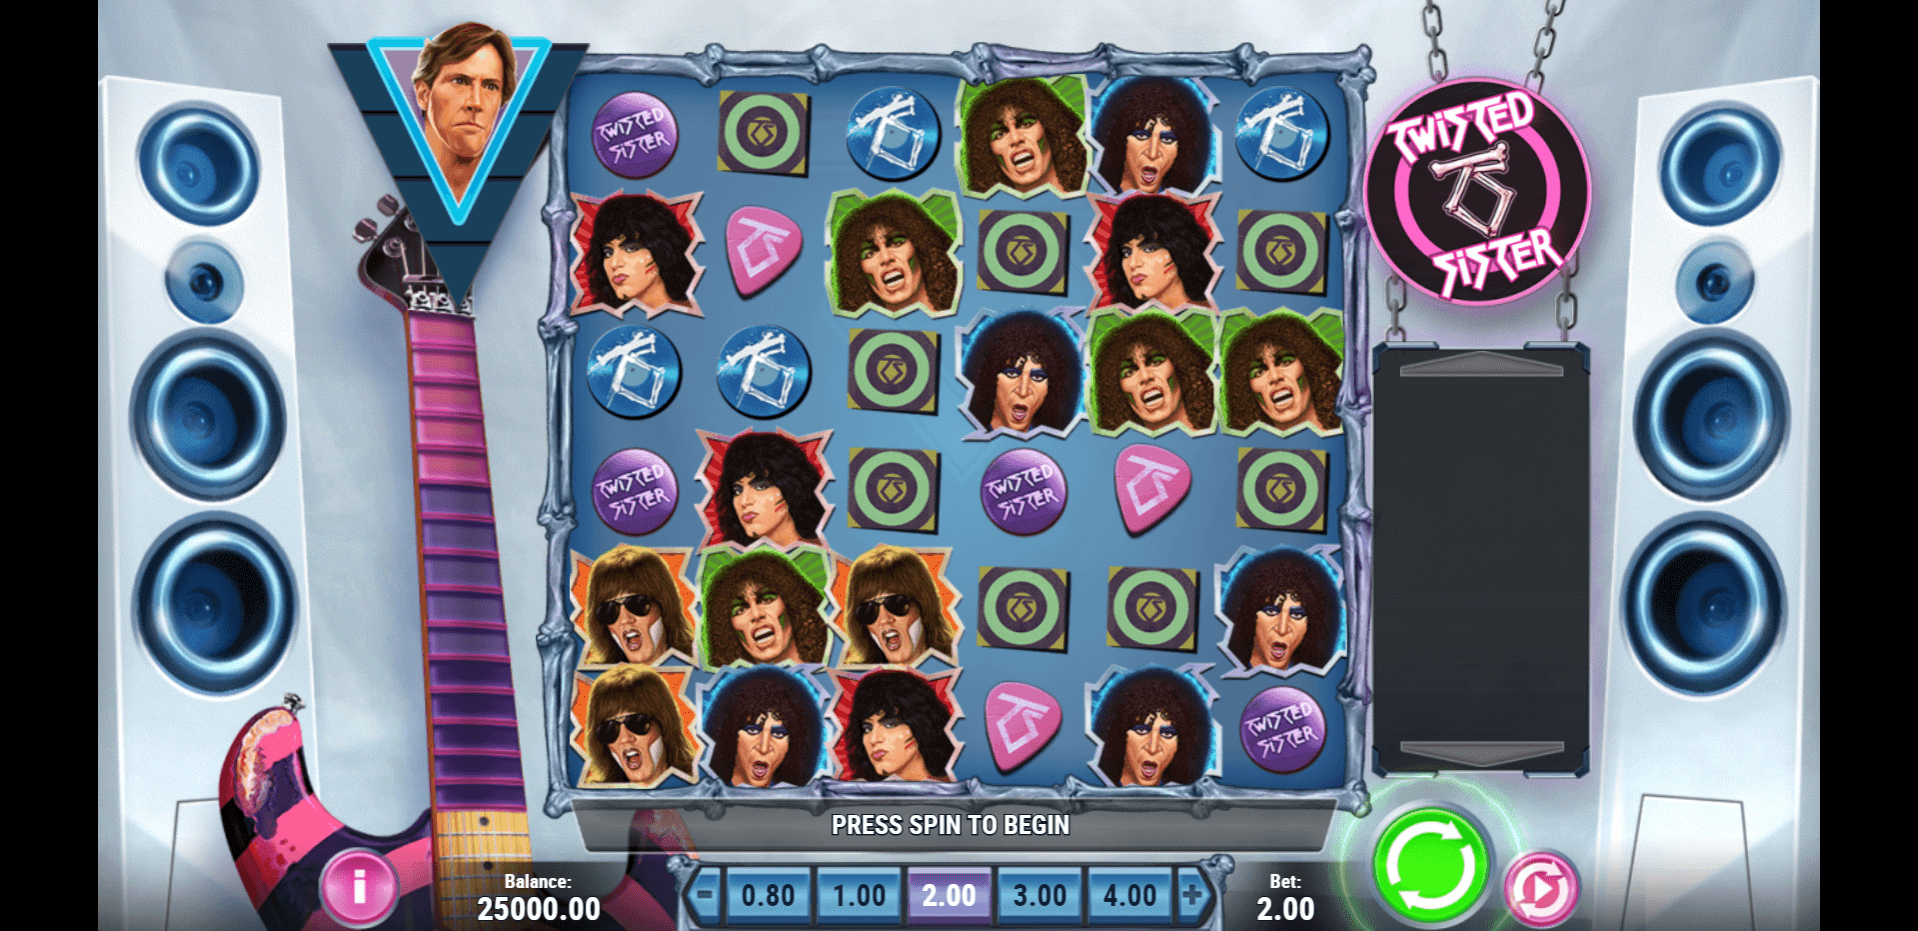 Twisted Sister slot play free